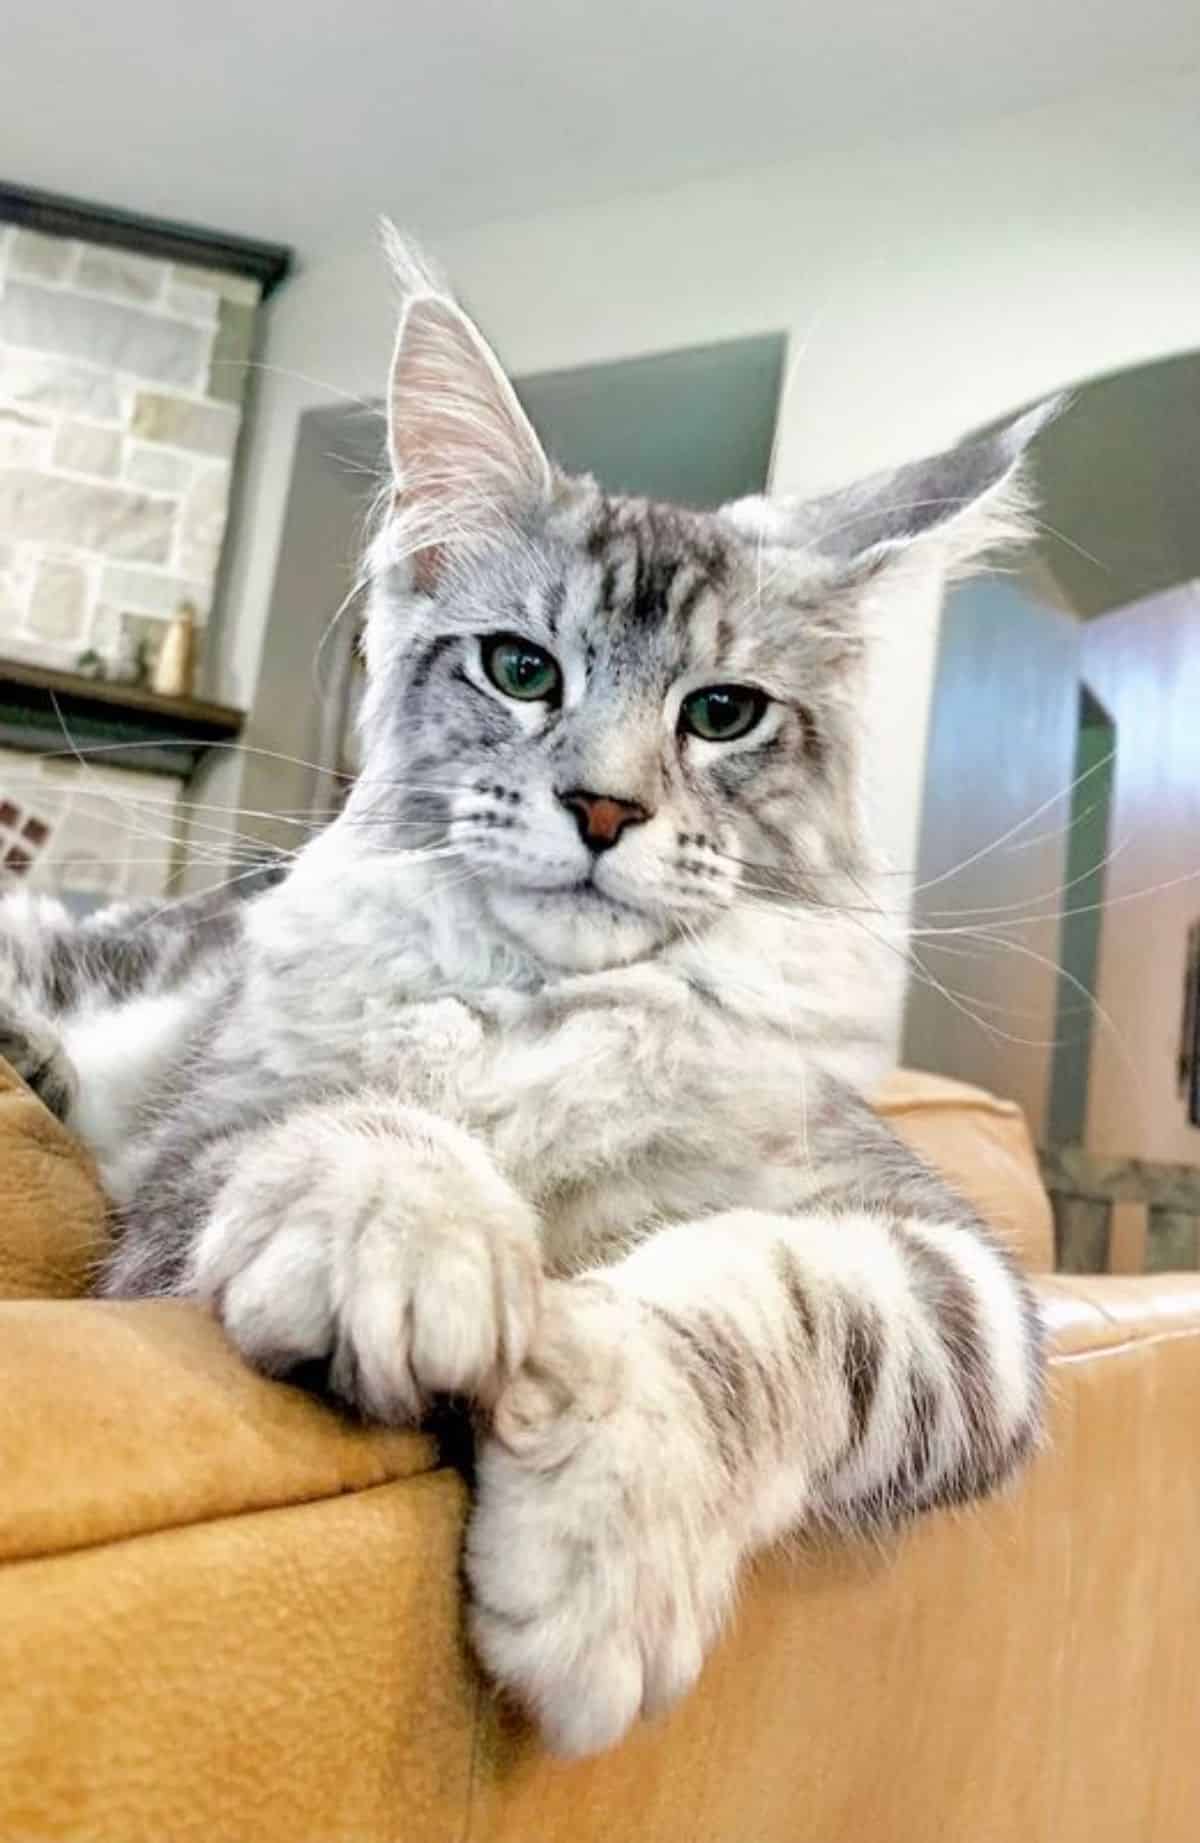 A silver-tabby maine coon lying on a leather couch.